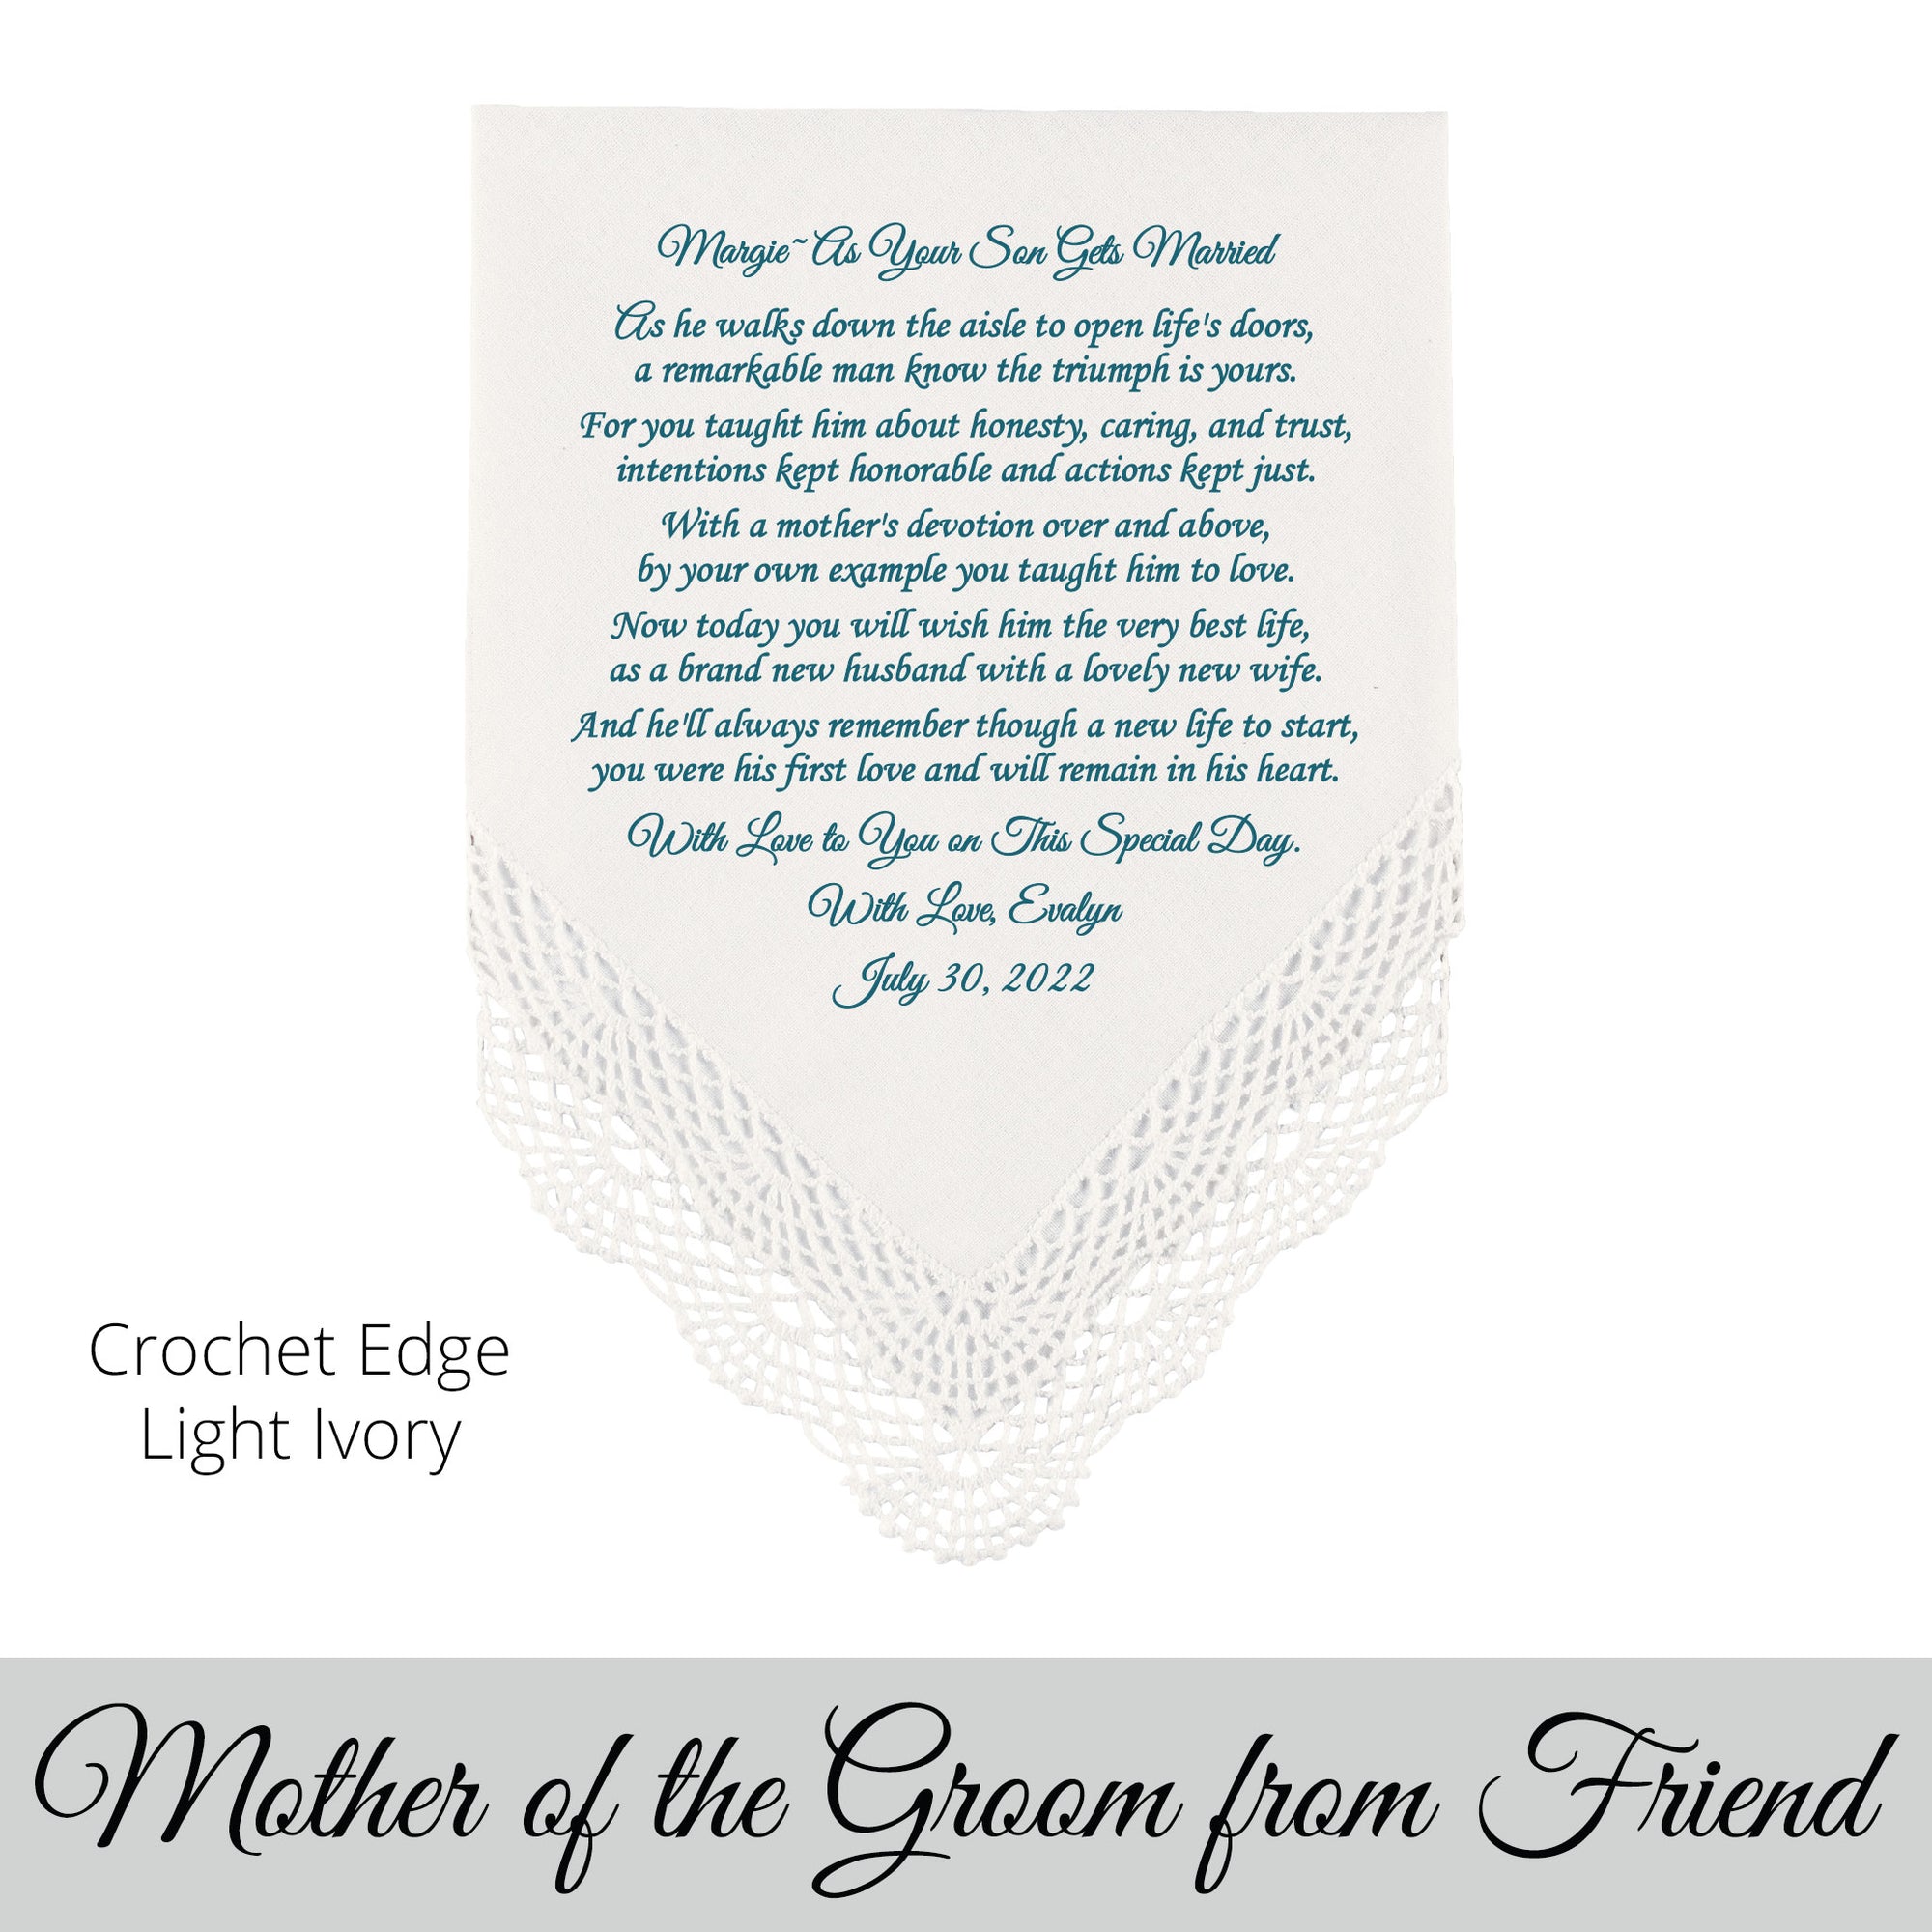 gift for the mother of the groom Wedding Hankie with printed poem from a friend